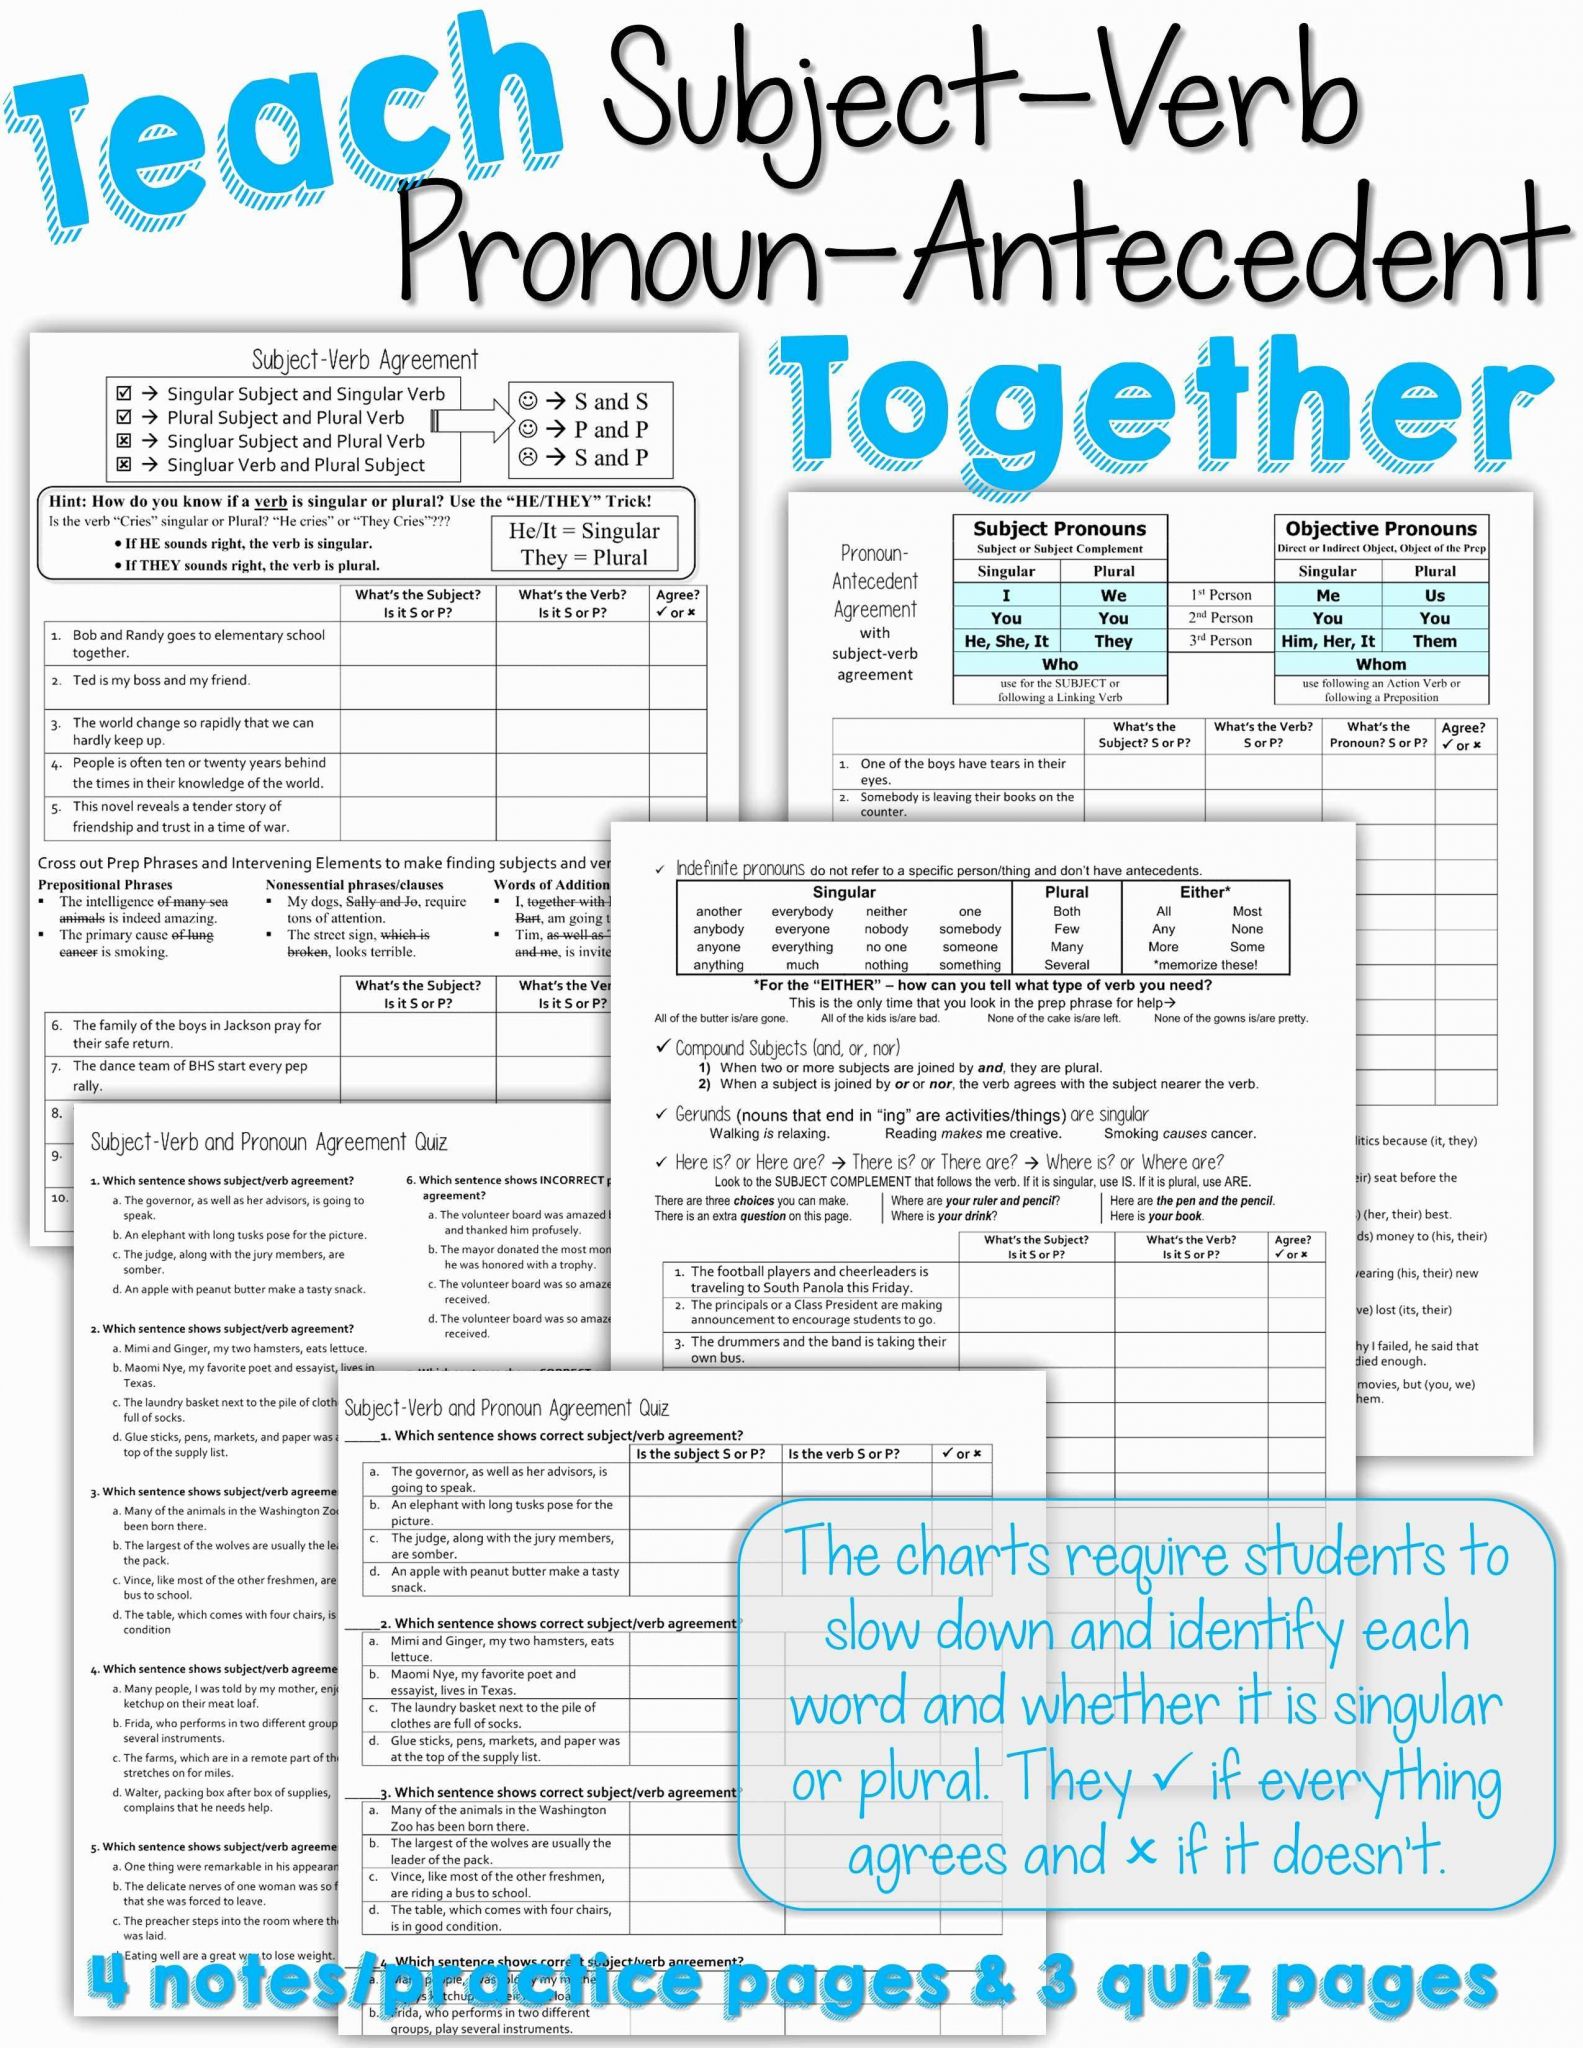 Pronouns and Antecedents Worksheets Along with 15 Lovely Pronoun Antecedent Agreement Quiz